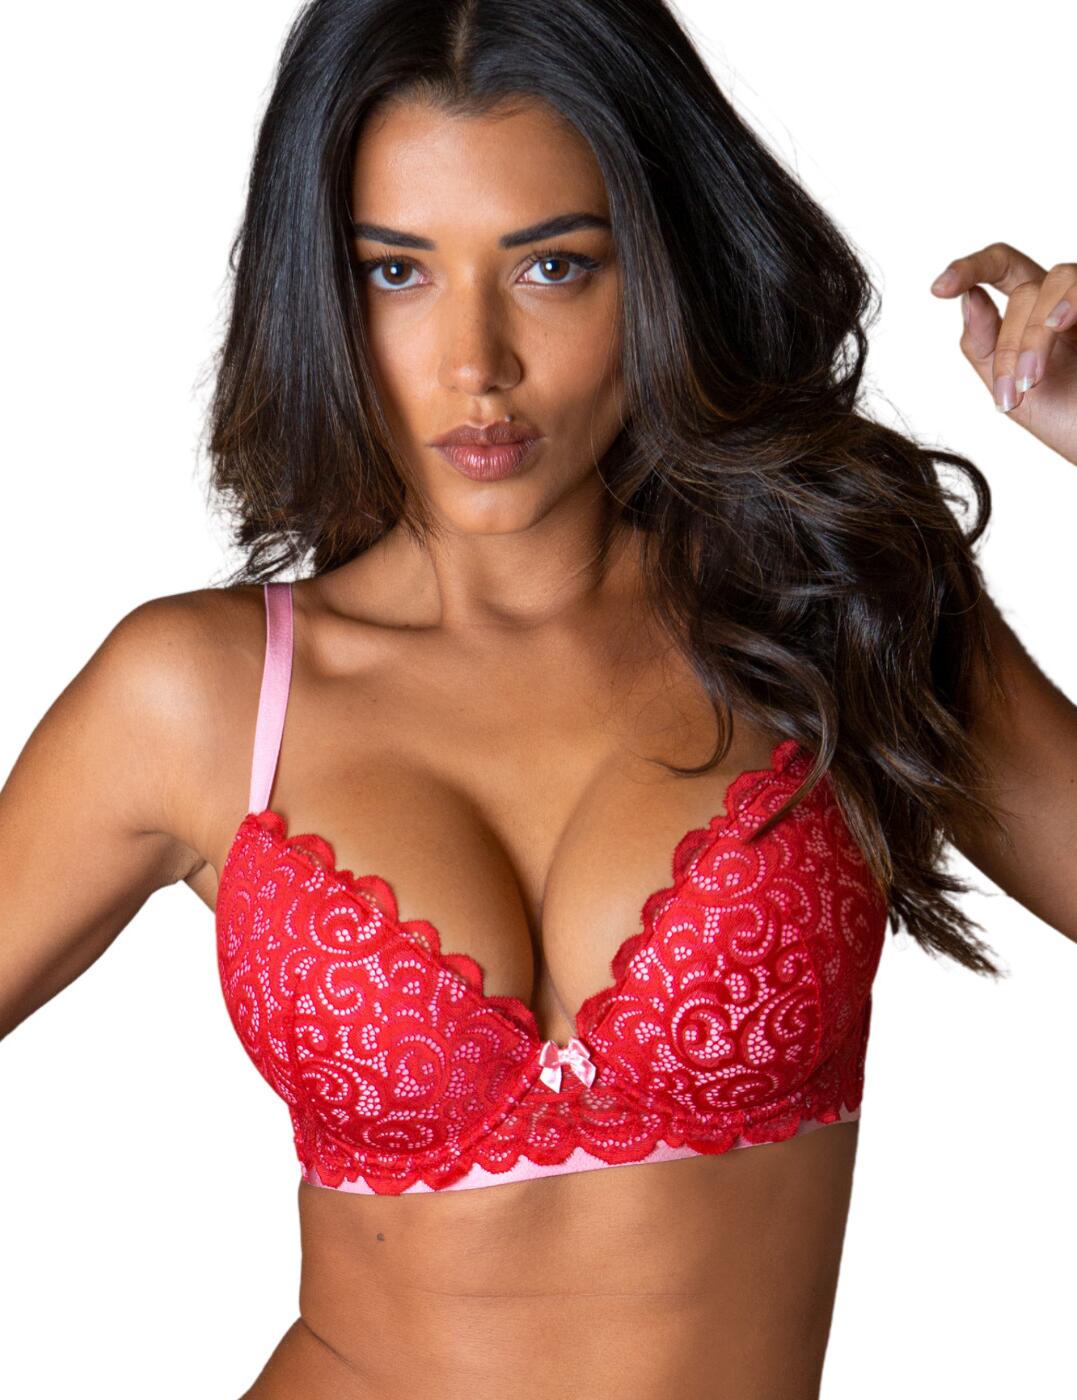 A Complete Guide on Push-Up Bra Benefits